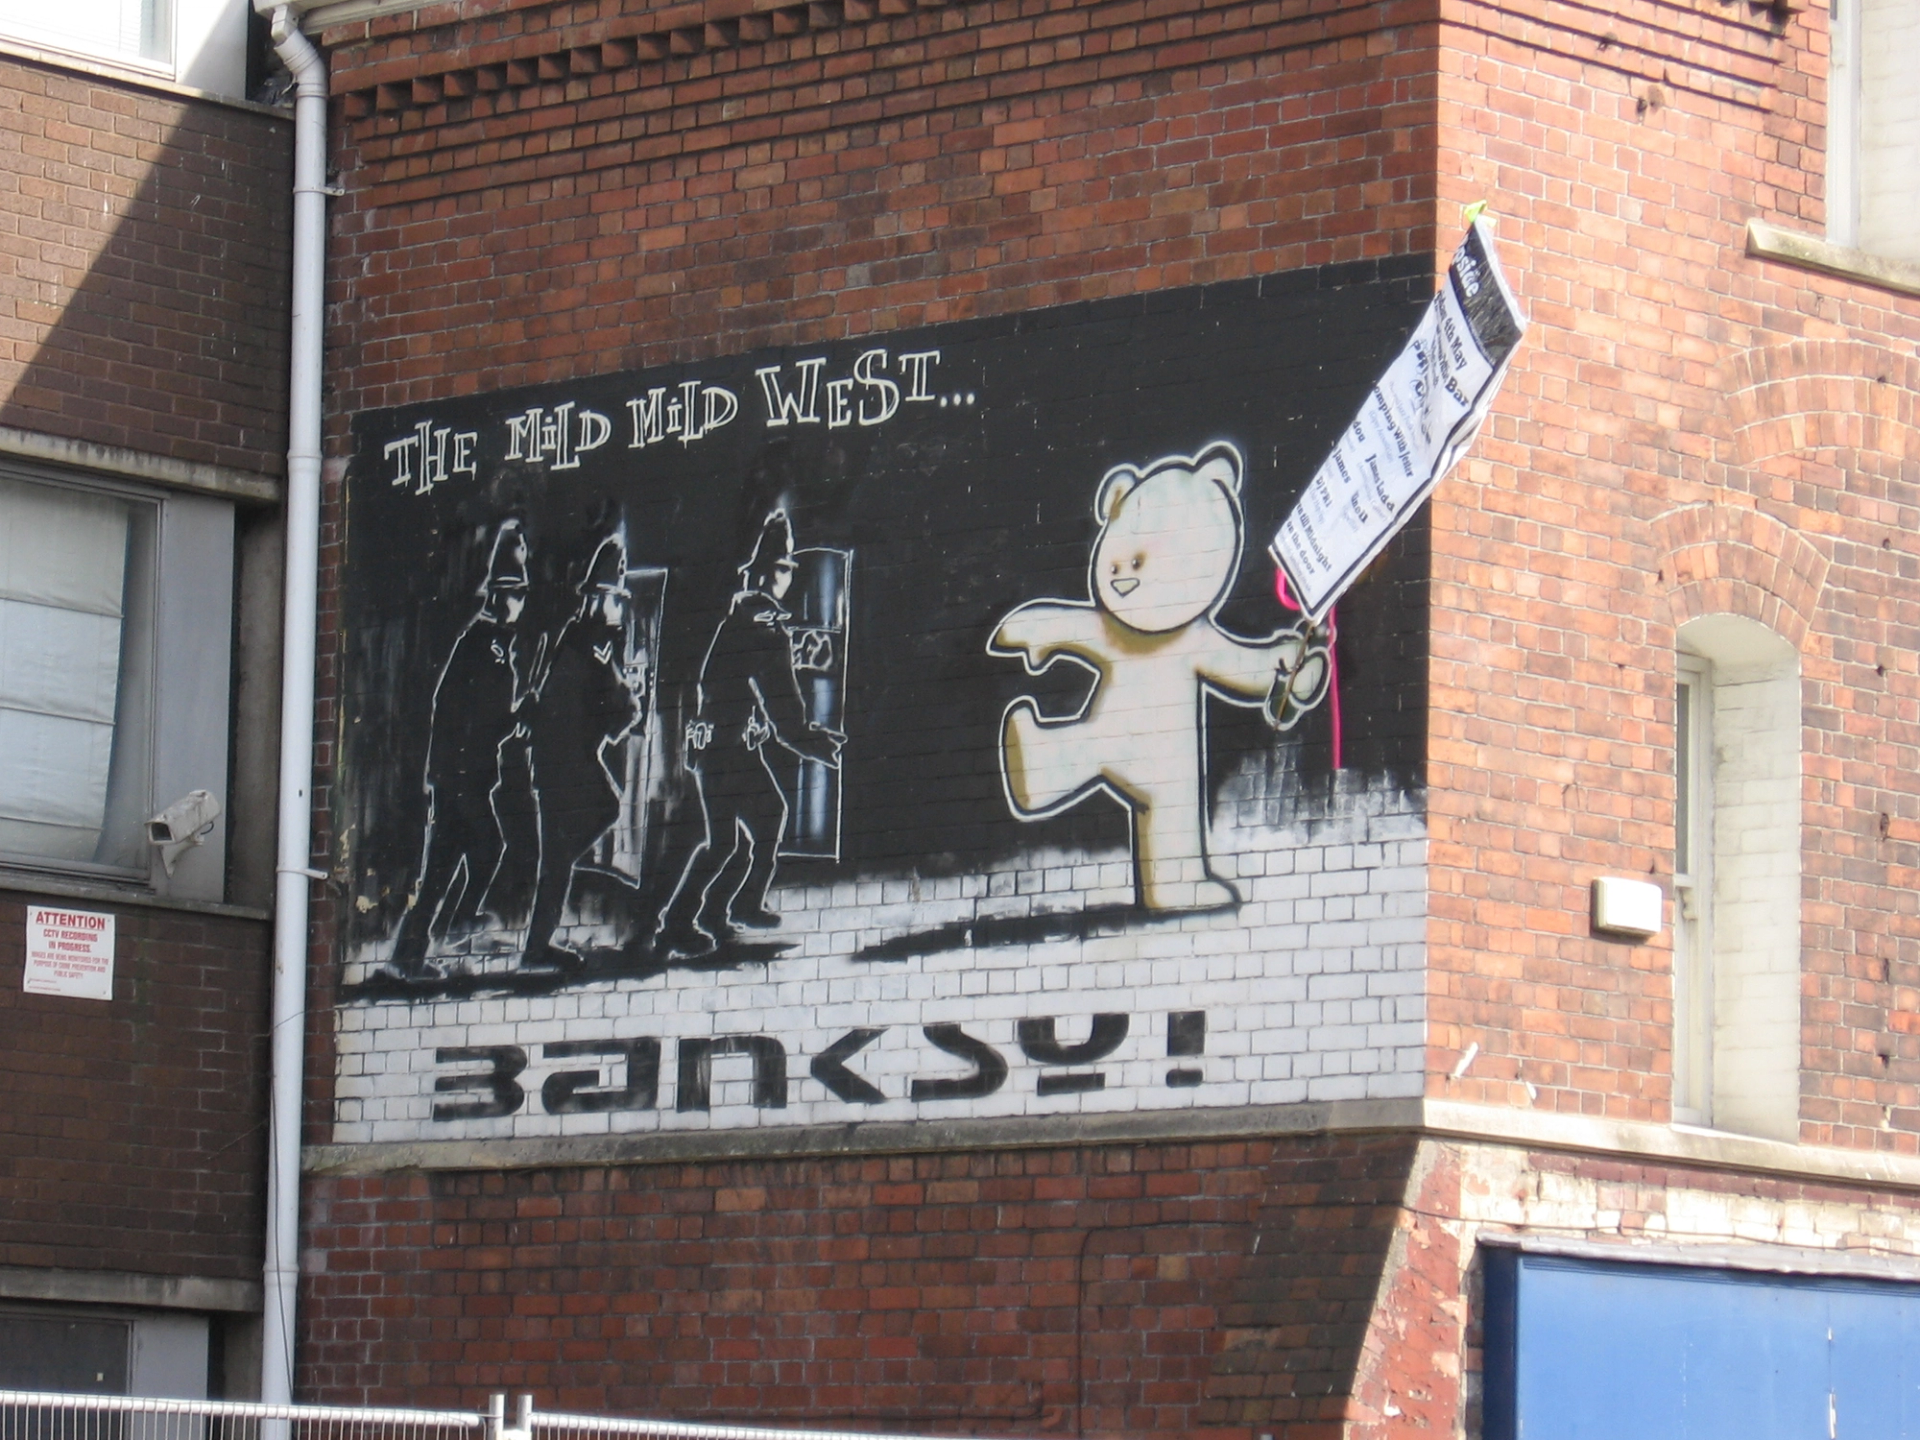 An image of the mural Mild Mild West by Banksy. It shows a soft, plush-like teddy bear throwing a firebomb on a group of police officers.